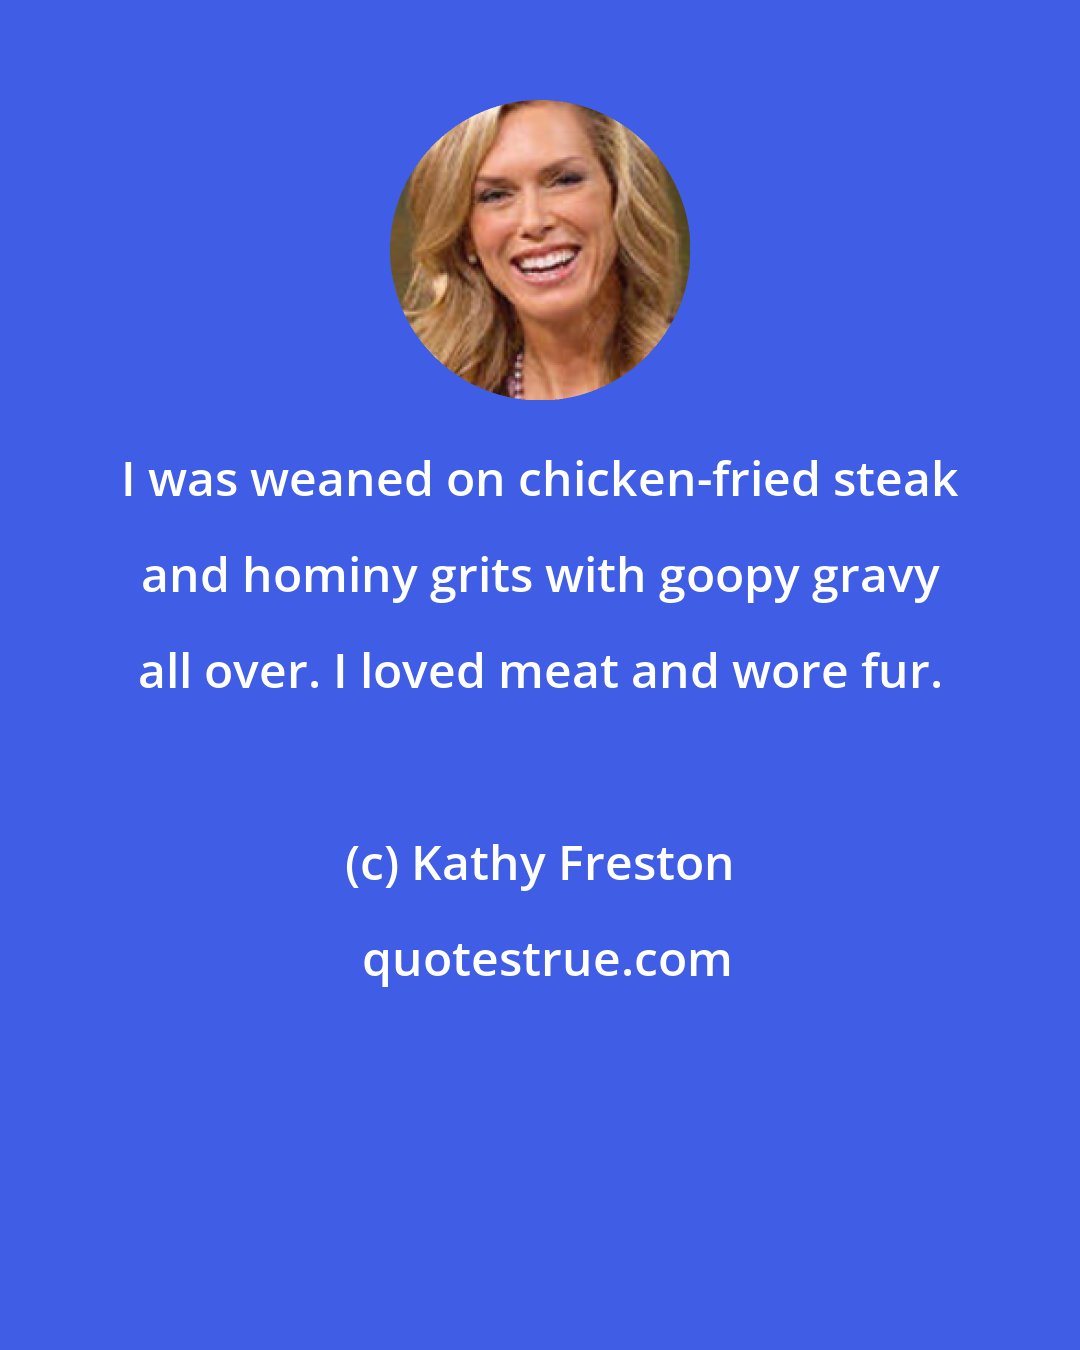 Kathy Freston: I was weaned on chicken-fried steak and hominy grits with goopy gravy all over. I loved meat and wore fur.